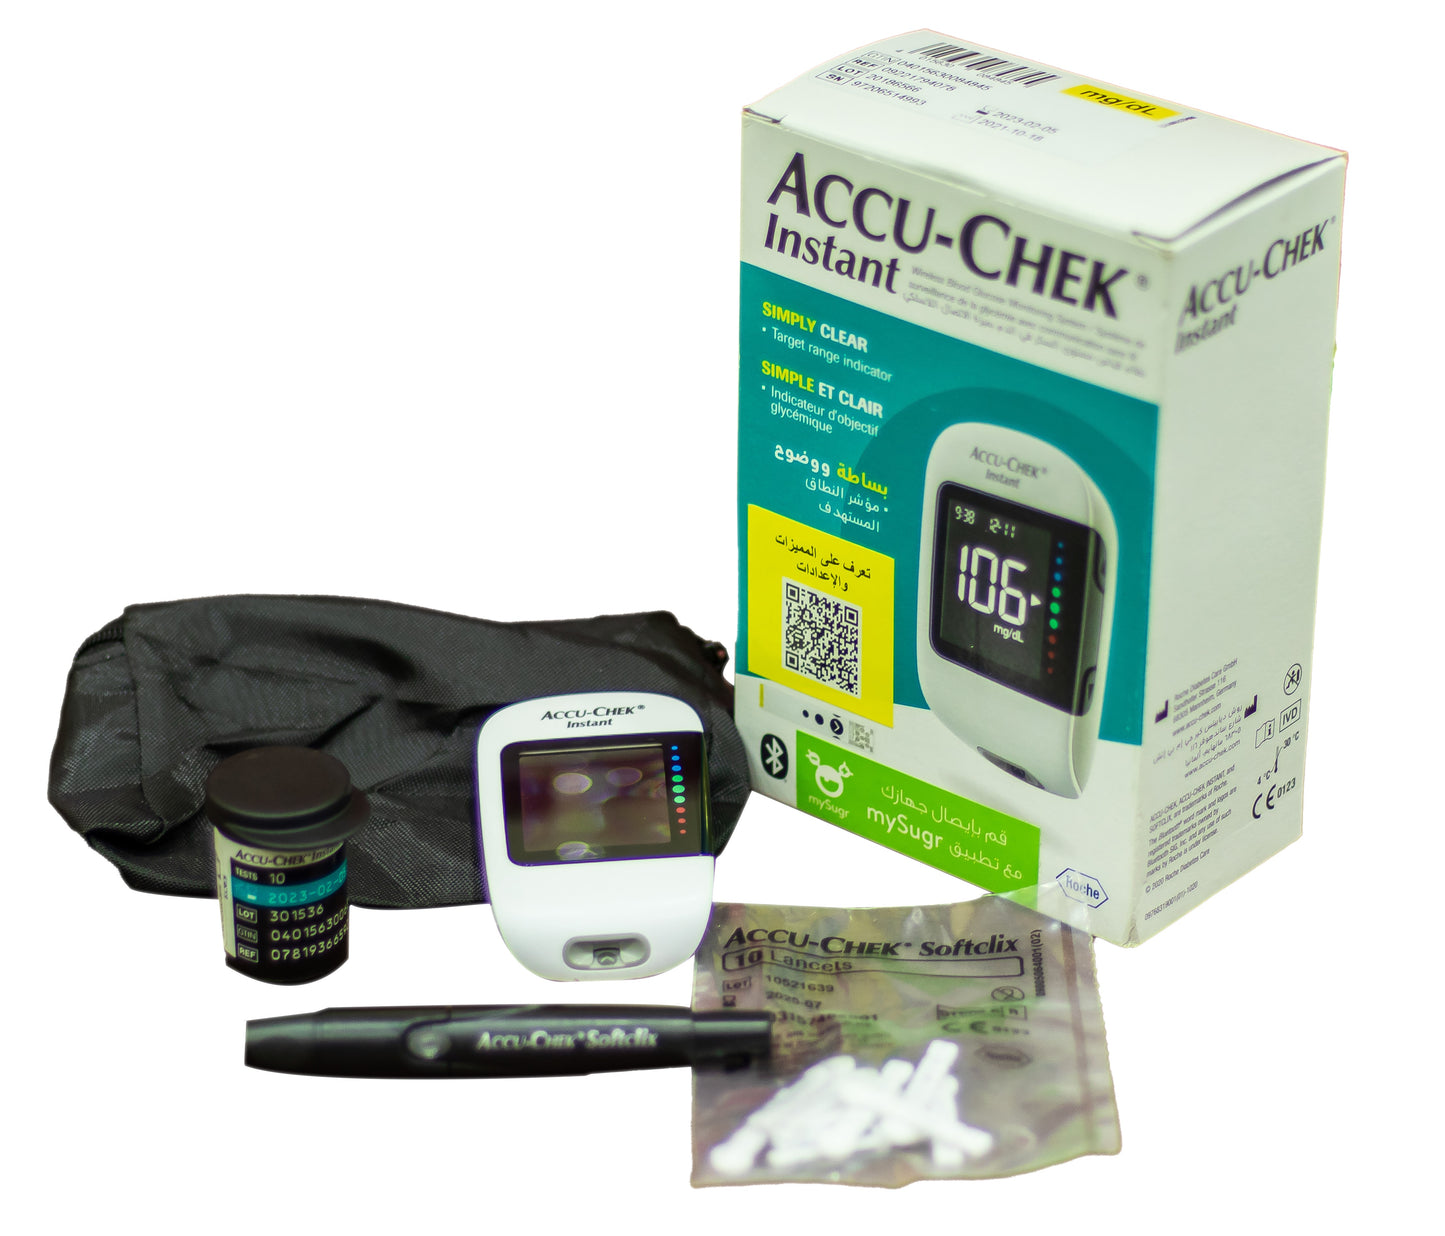 Accu-Chek instant monitoring system Plus 10 strips